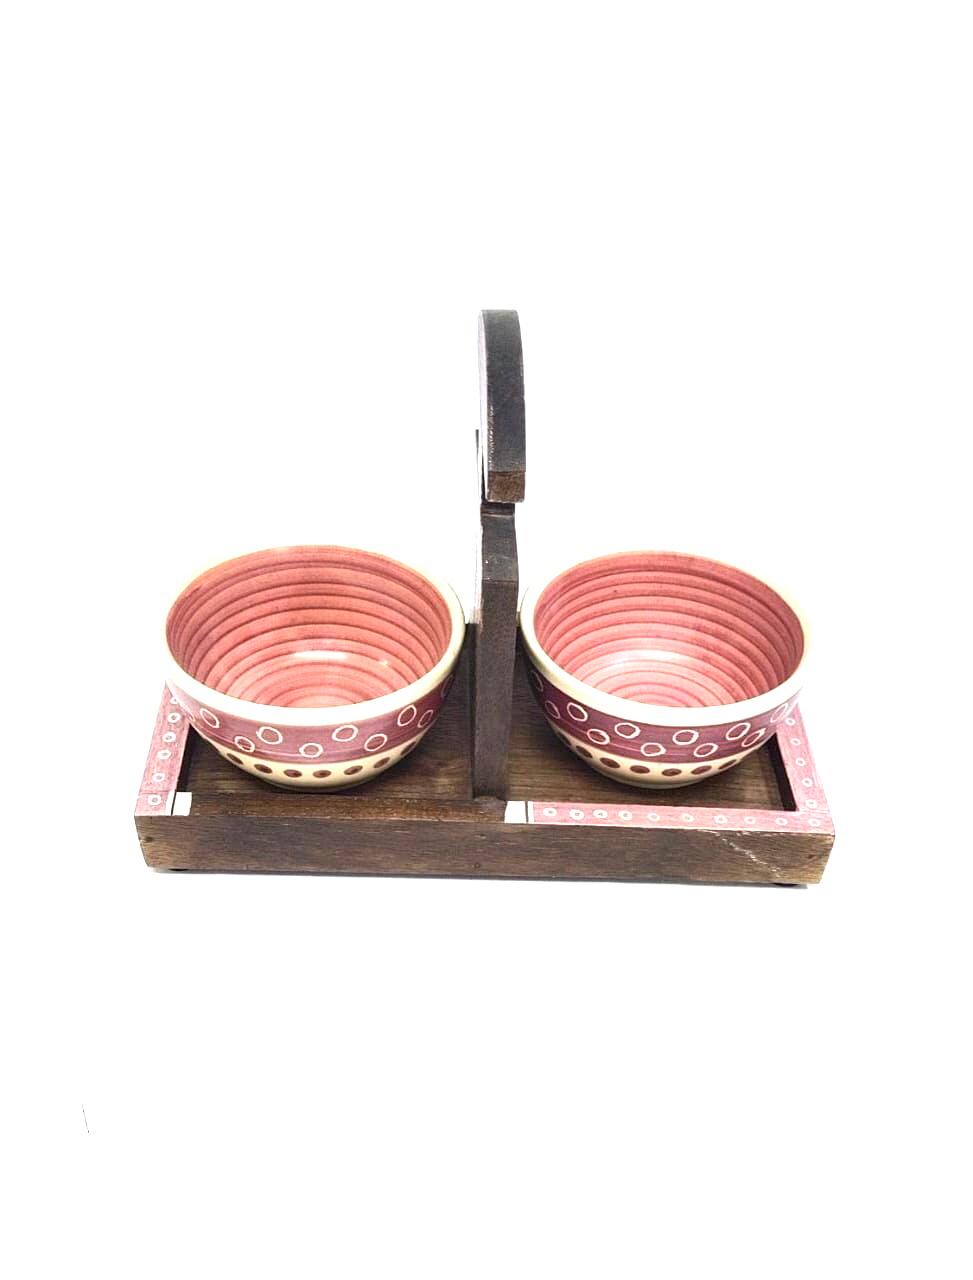 Luxurious Kitchenware Two Ceramic Bowls On Serving Stand By Tamrapatra